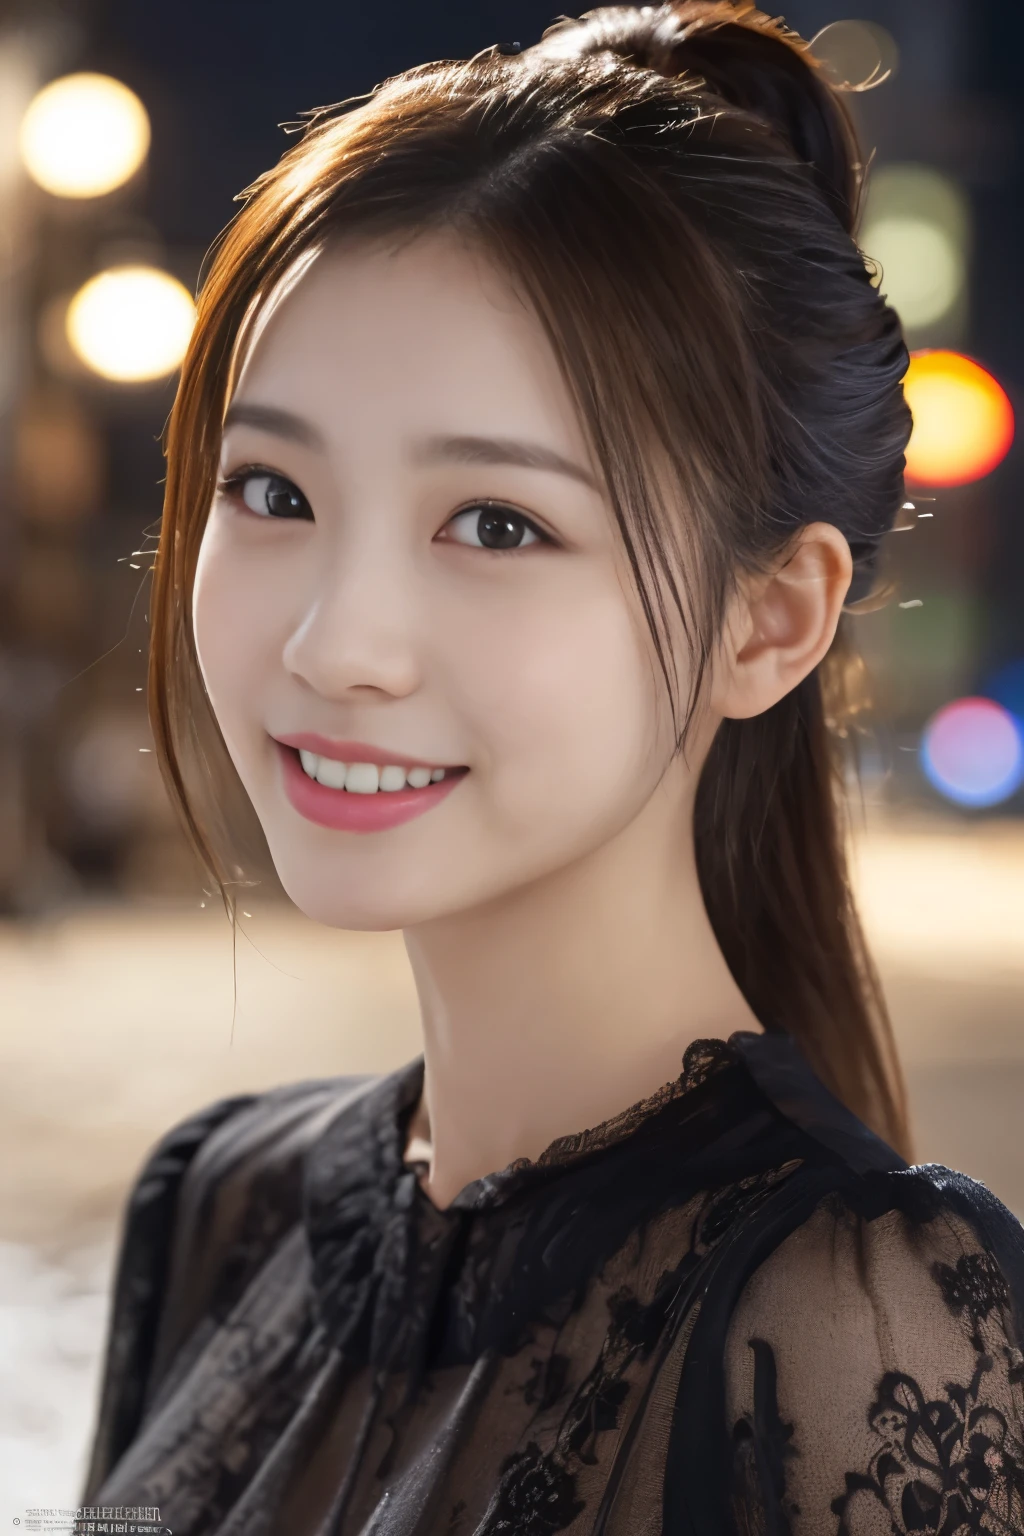 1 girl, (Wearing a black blouse:1.2), Beautiful Japan actress, (ponytail:1.3),
(RAW photo, highest quality), (realistic, Photoreal:1.4), masterpiece, 
very delicate and beautiful, very detailed, 2k wallpaper, wonderful, 
finely, Very detailed CG Unity 8k 壁紙, Super detailed, High resolution, 
soft light, beautiful detailed girl, very detailed目と顔, beautifully detailed nose, beautiful and detailed eyes, cinematic lighting, 
BREAK
(Against the backdrop of a snowy night cityscape 1.3), city lights, 
perfect anatomy, slender body, smile, Face the front completely, look at the camera